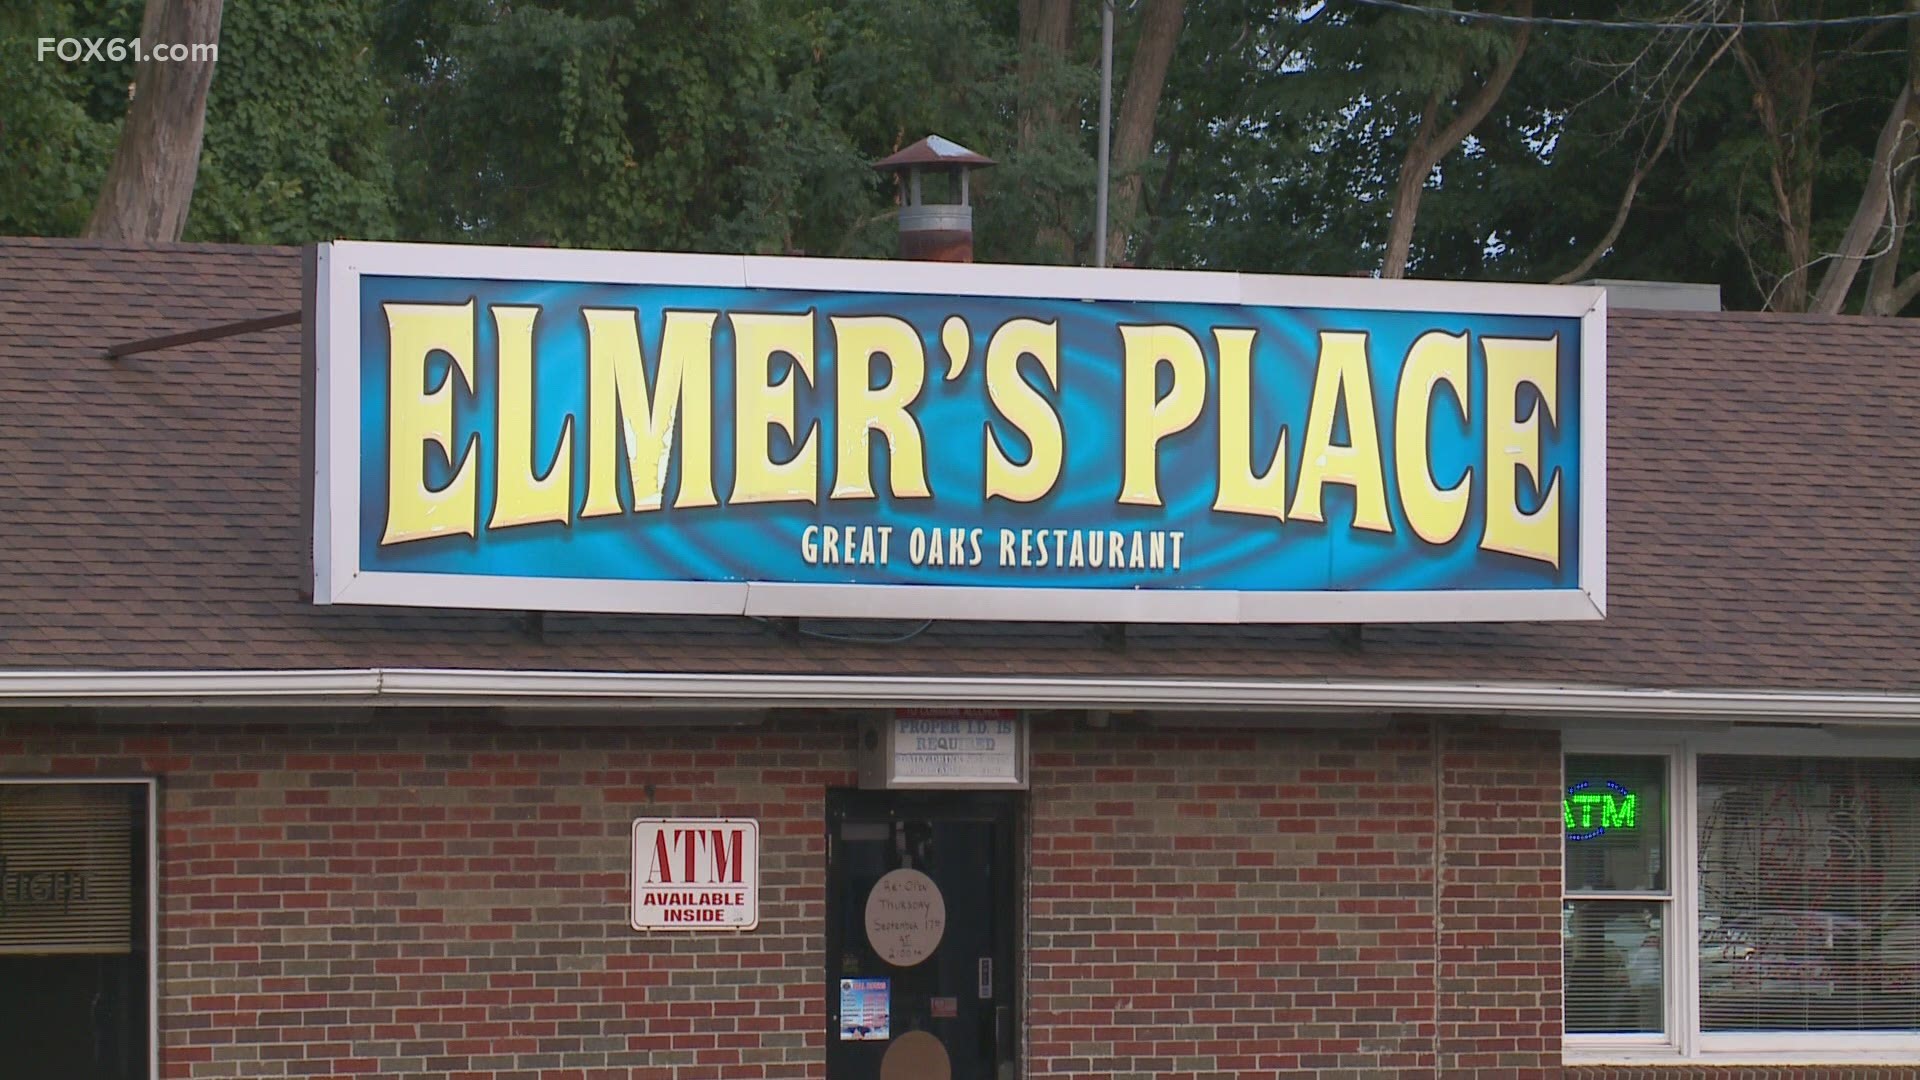 The owners of the establishment located across the street from the University say they are being wrongfully targeted.